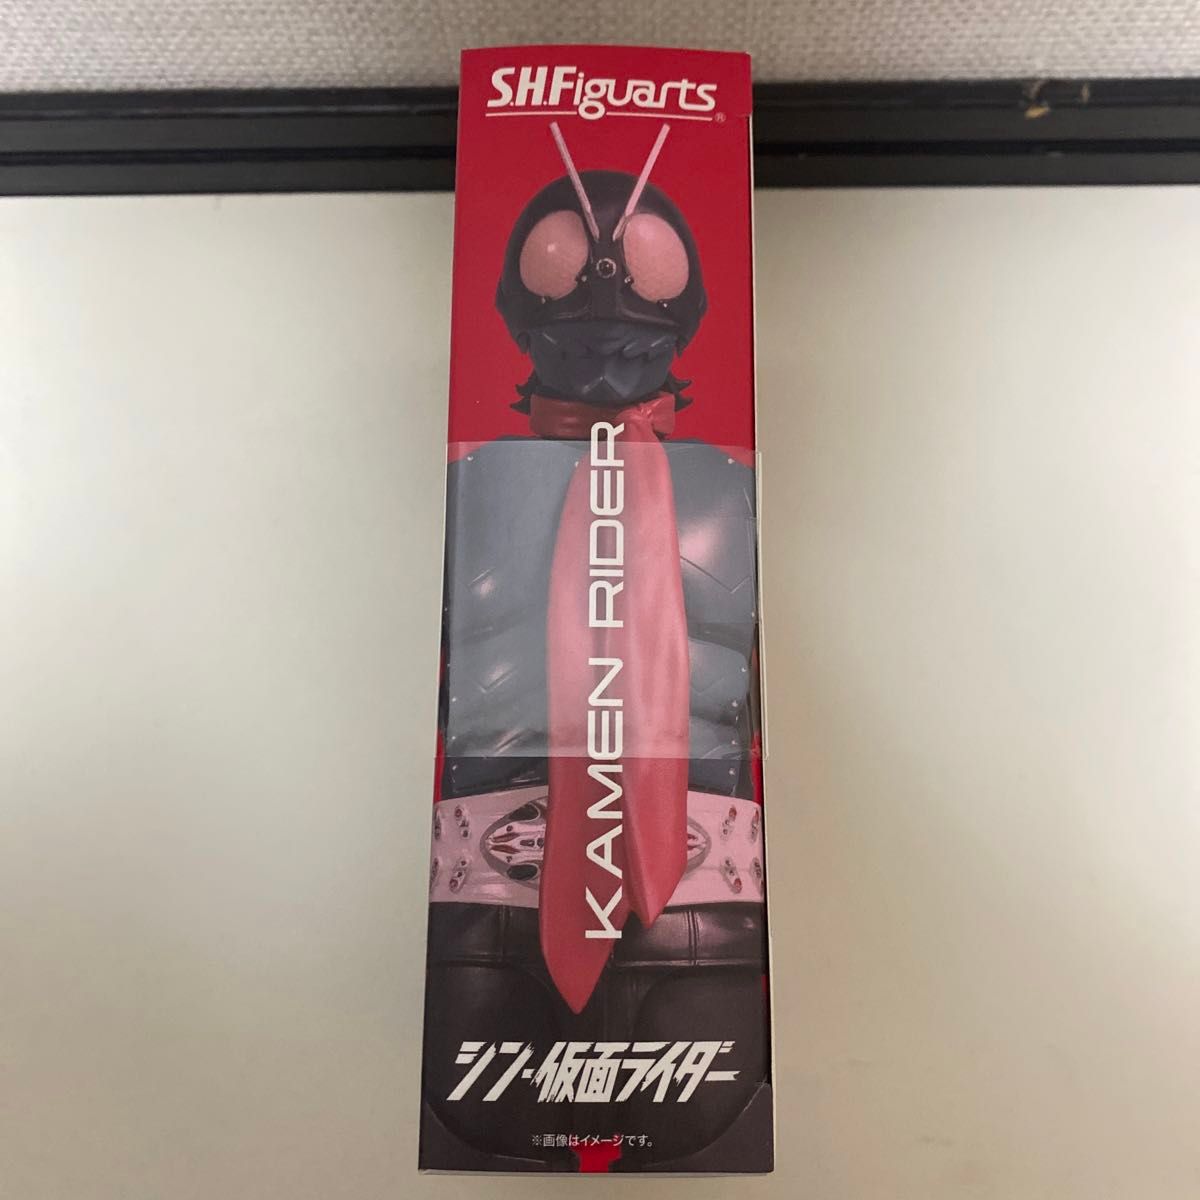 S.H.Figuarts シン・仮面ライダー　新品未使用